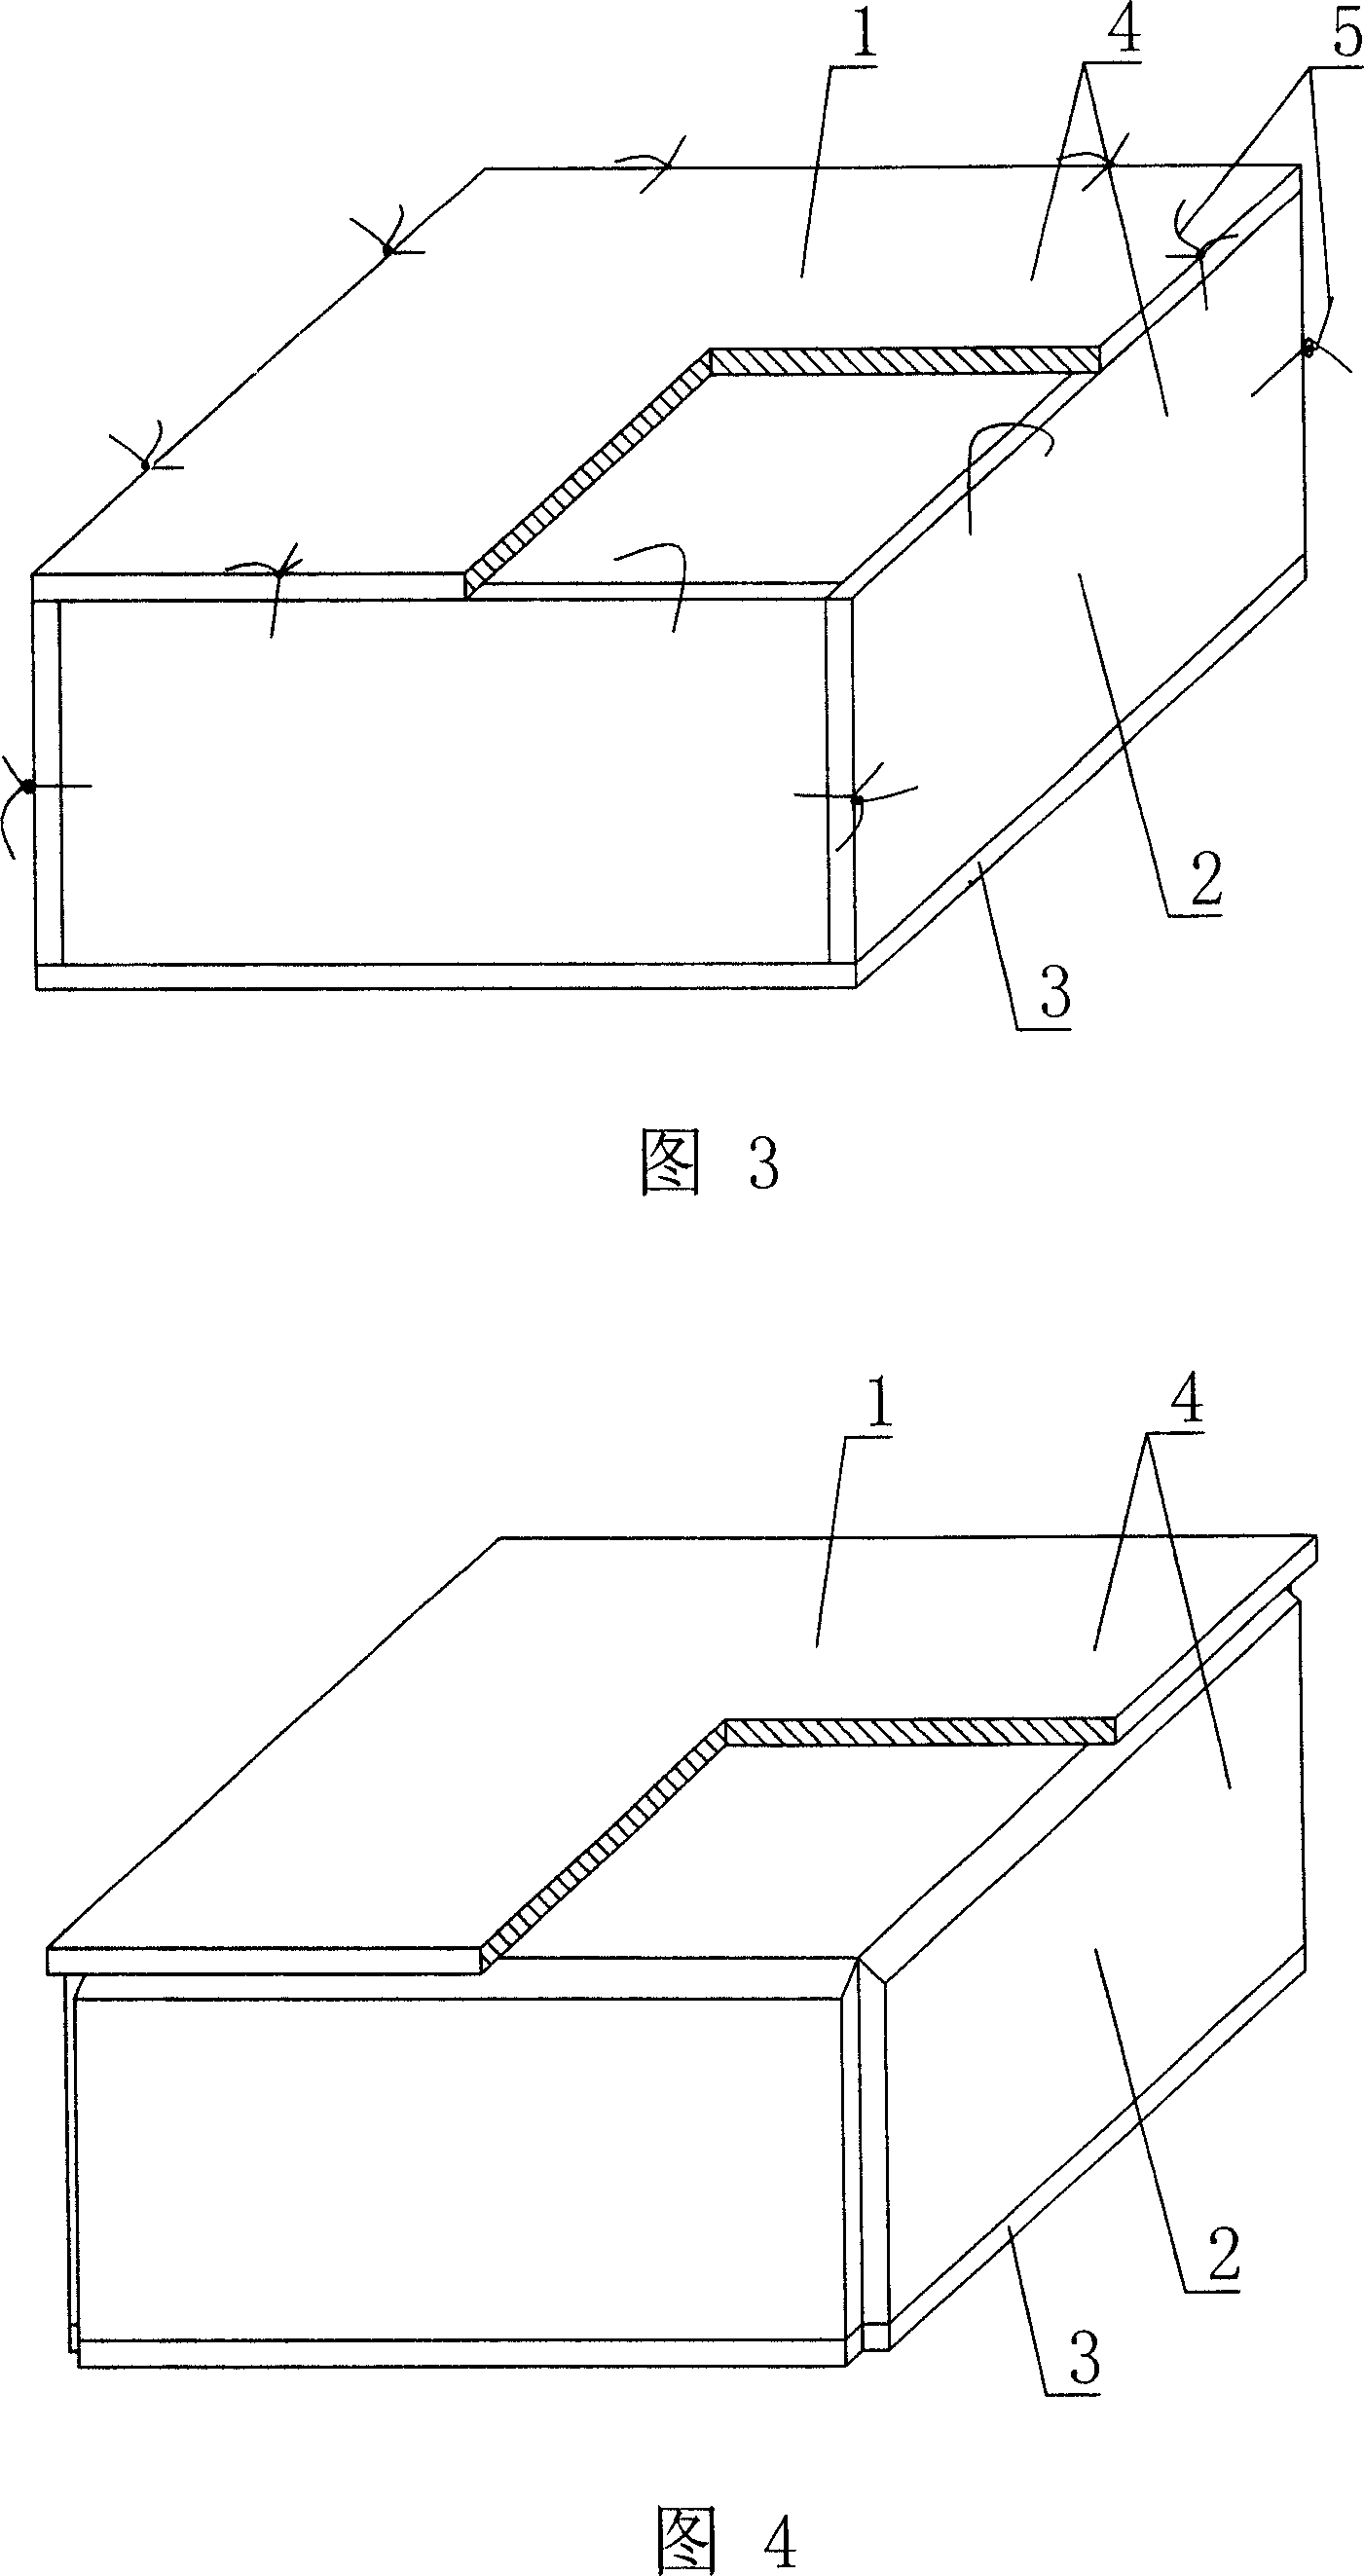 Cast-in-place concrete hollow-cavity shuttering member